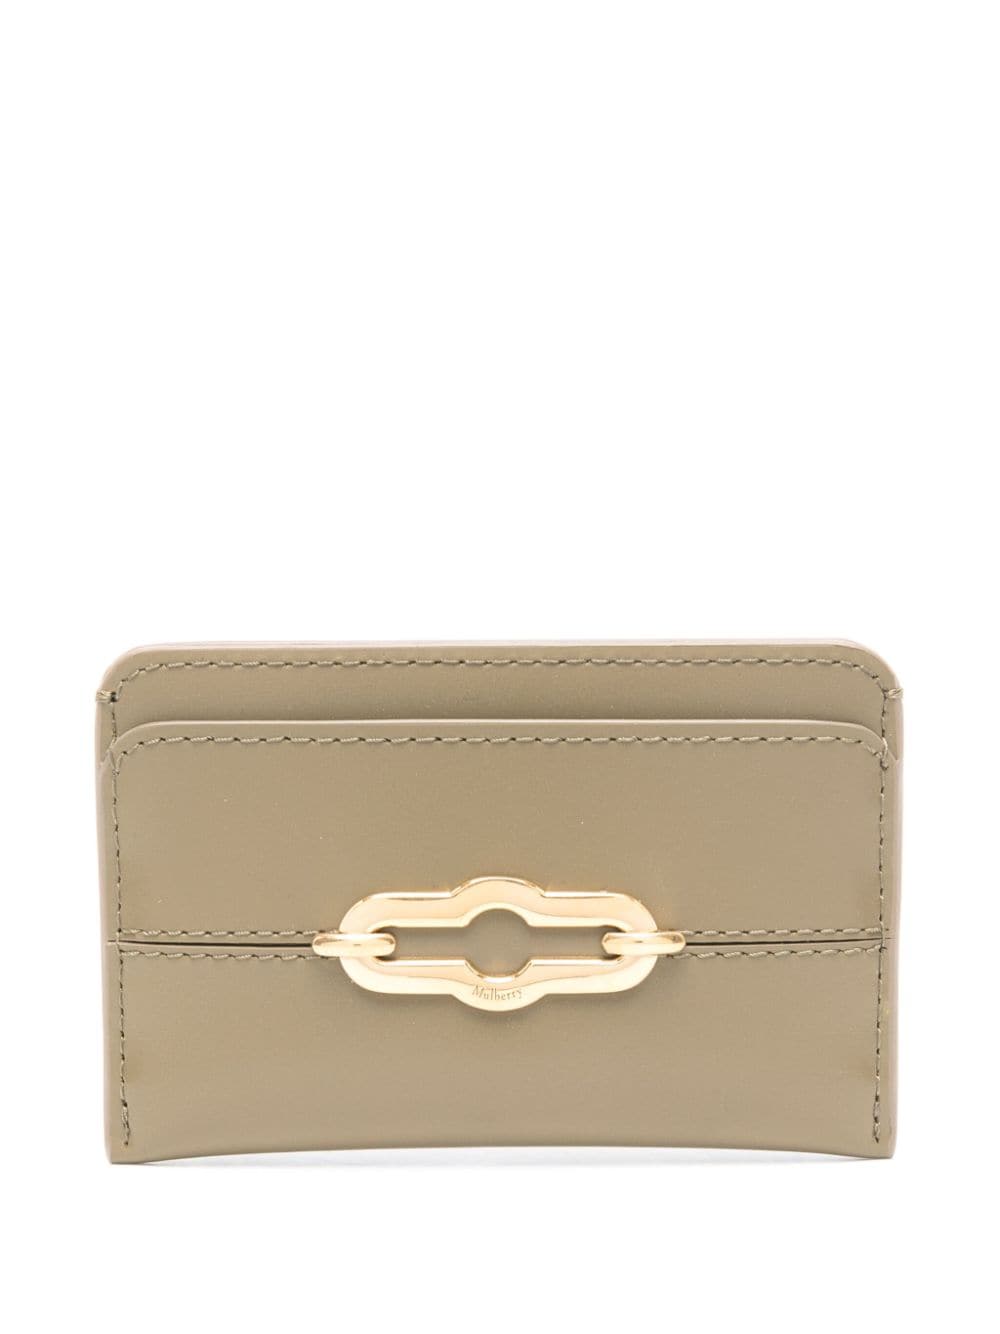 Mulberry Pimlico leather cardholder - Green von Mulberry